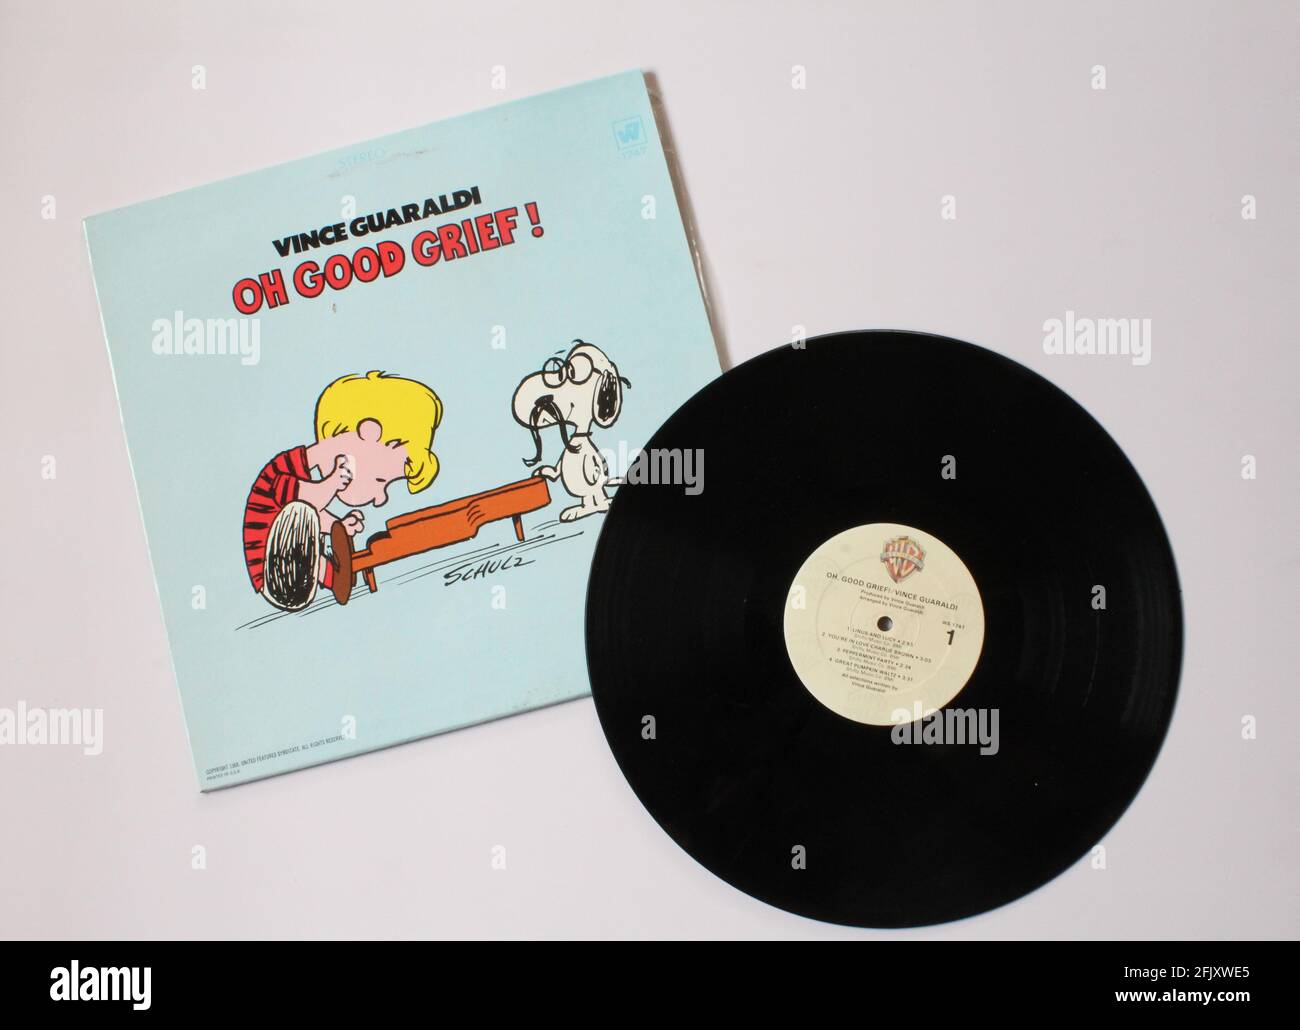 Peanuts songs composed by artist Vince Guaraldi music album on vinyl record LP disc. Titled: Oh Good Grief! Stock Photo